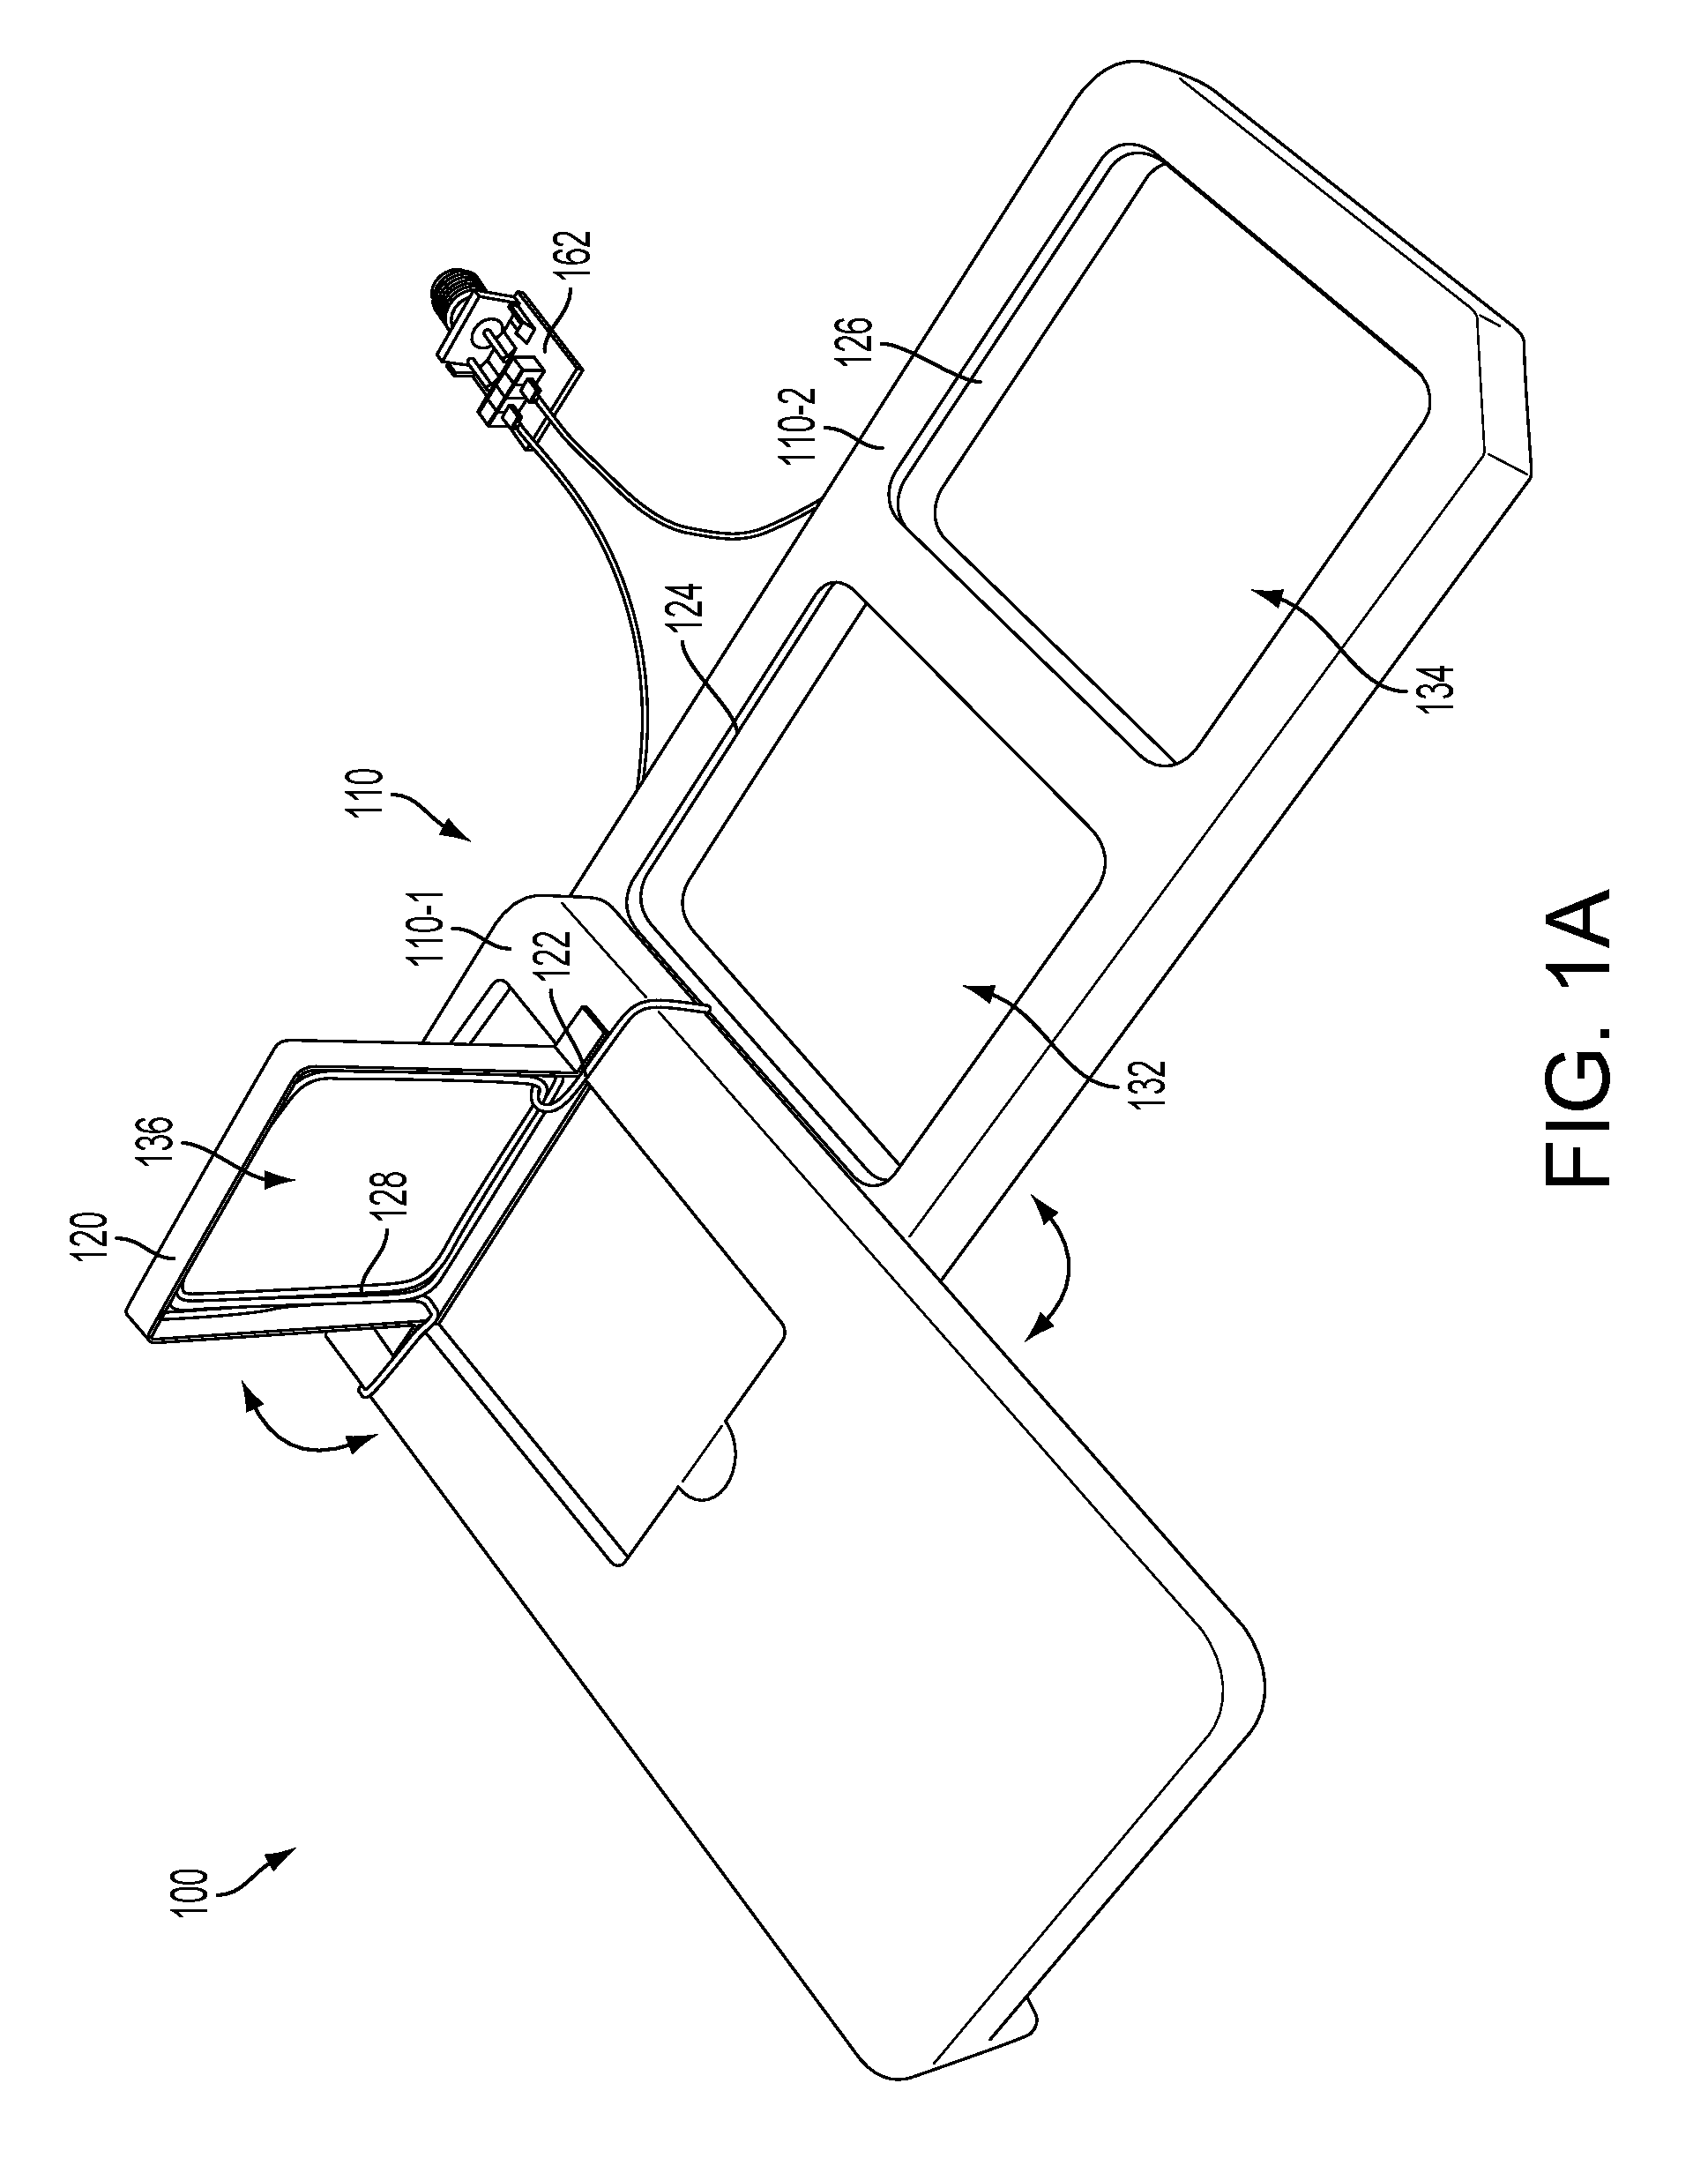 Apparatus for wireless device charging using radio frequency (RF) energy and device to be wirelessly charged